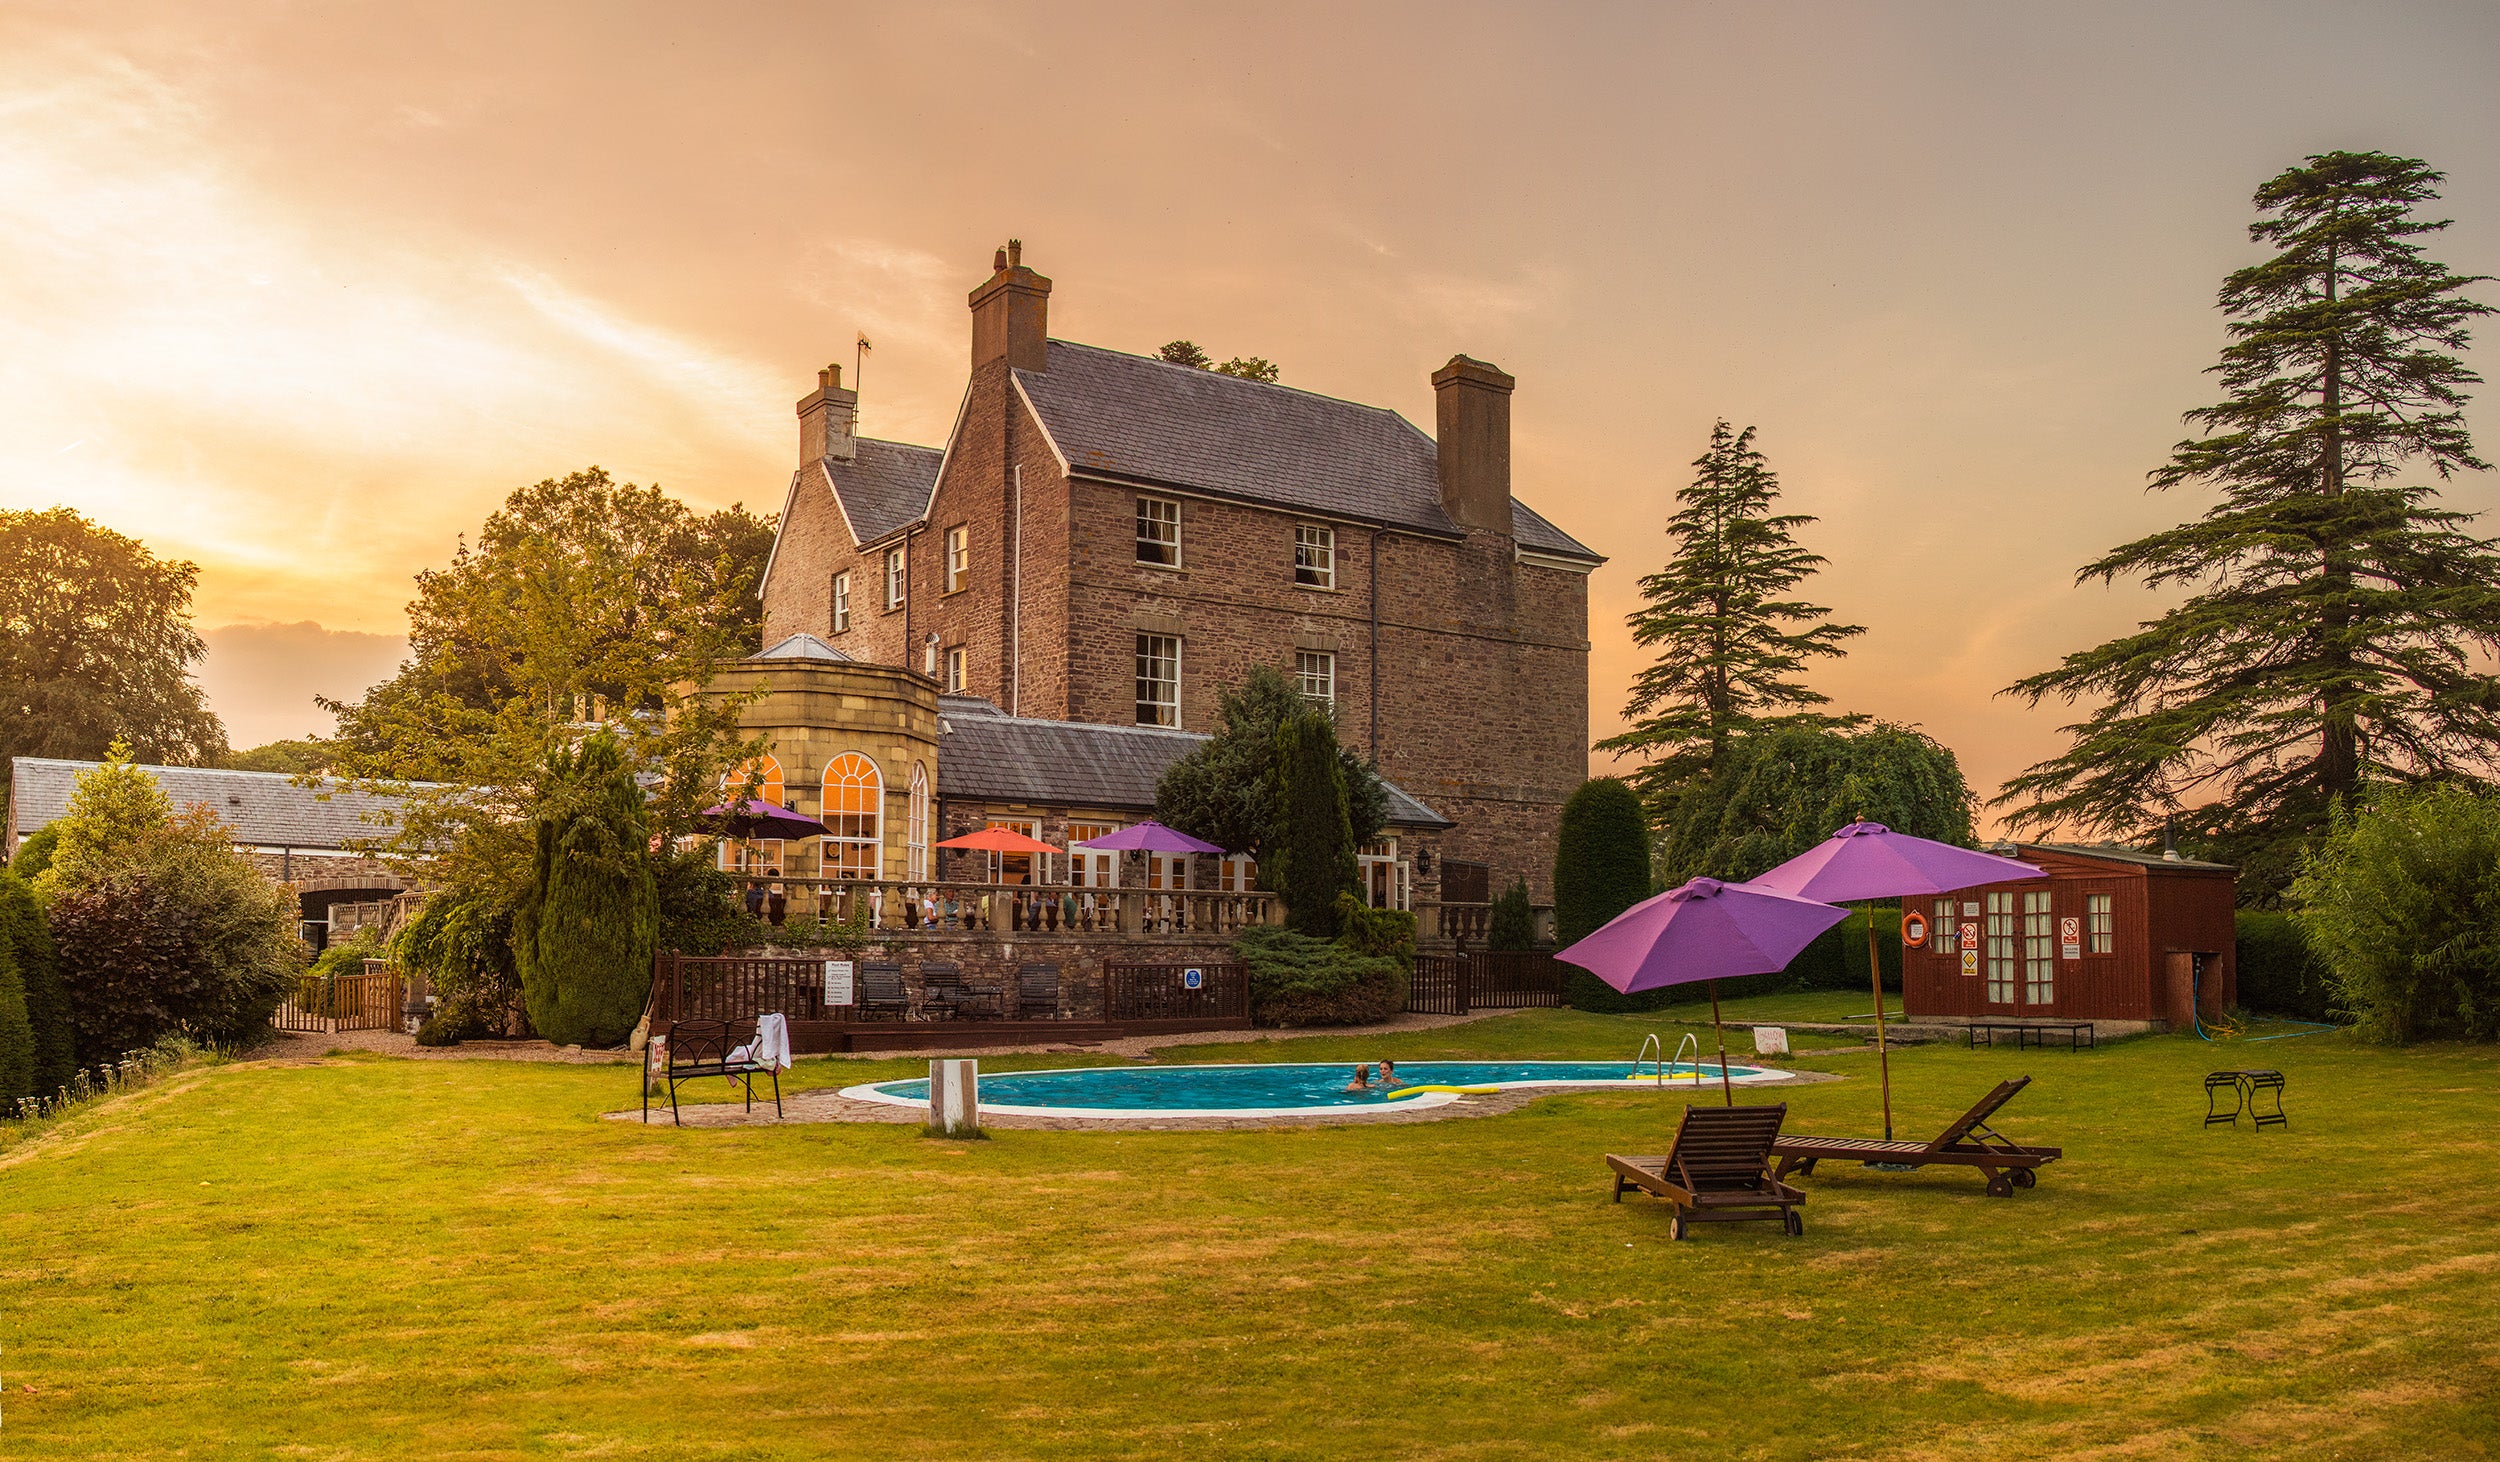 You can find peace at this Georgian manor hotel